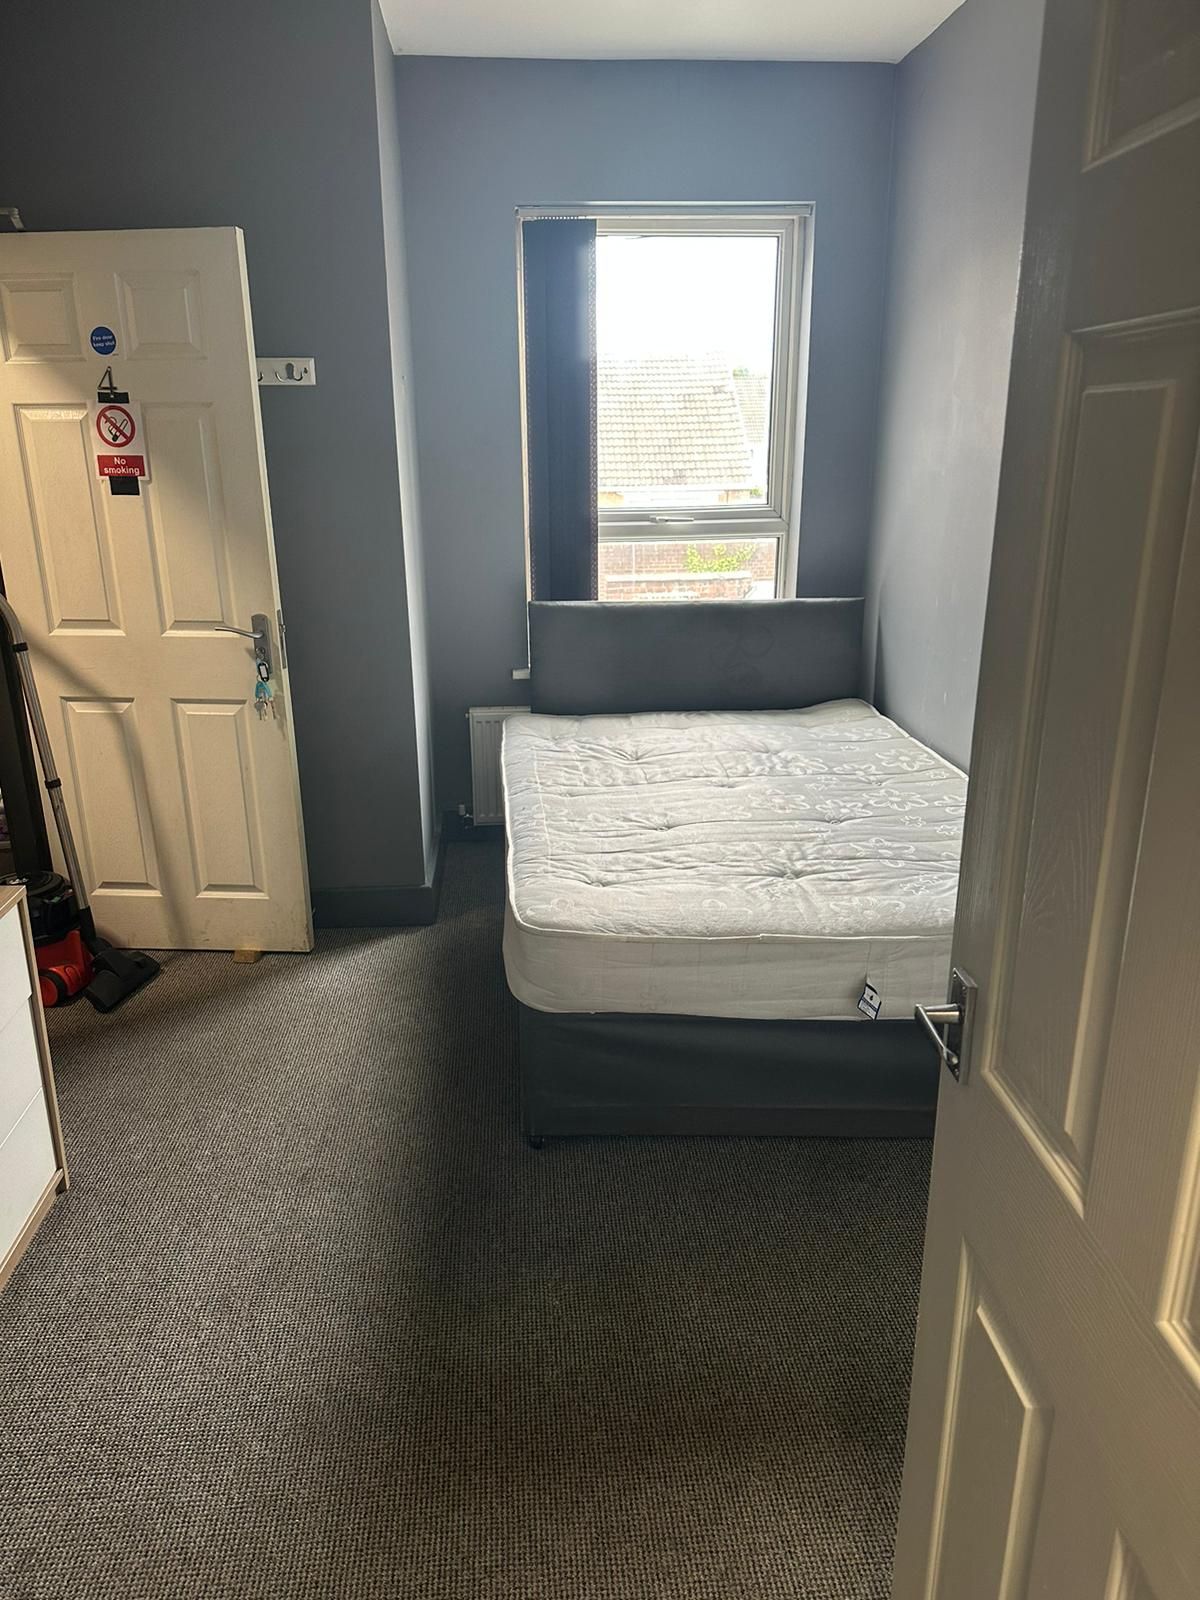 1 bed Room for rent in Doncaster. From 247 Property Services Ltd